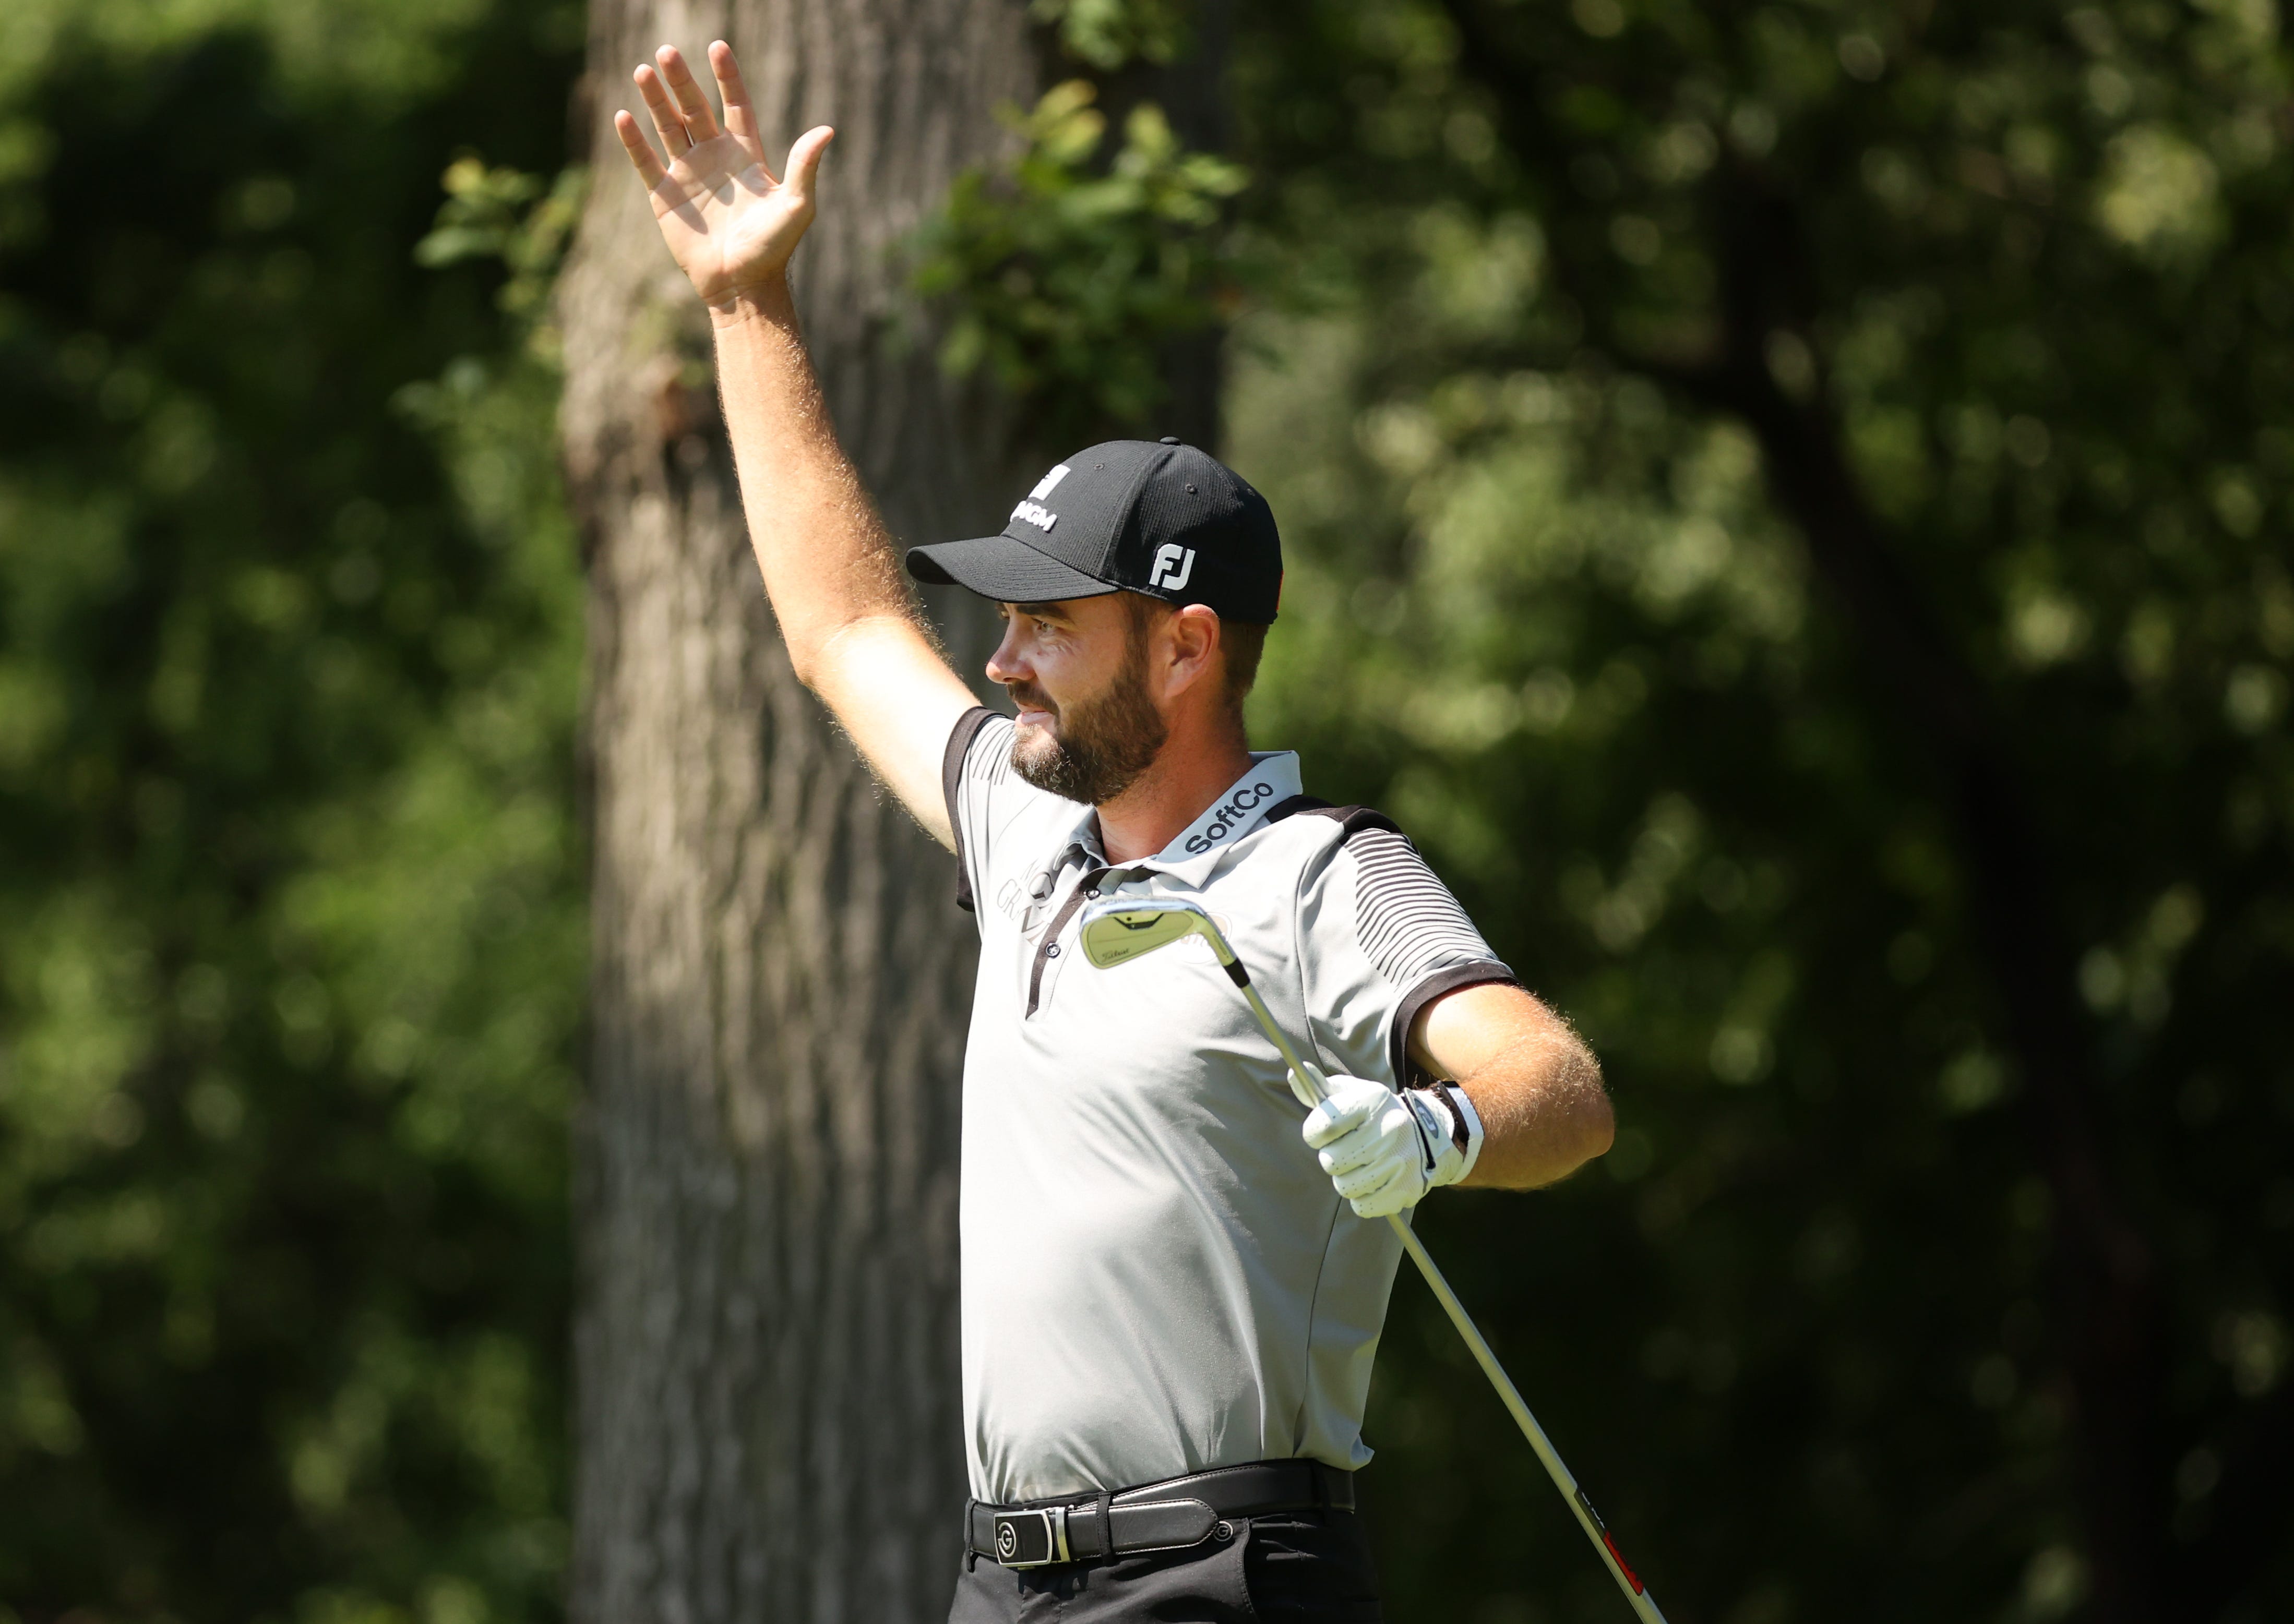 Troy Merritt celebrates his ace at the 2021 Rocket Mortgage Classic.